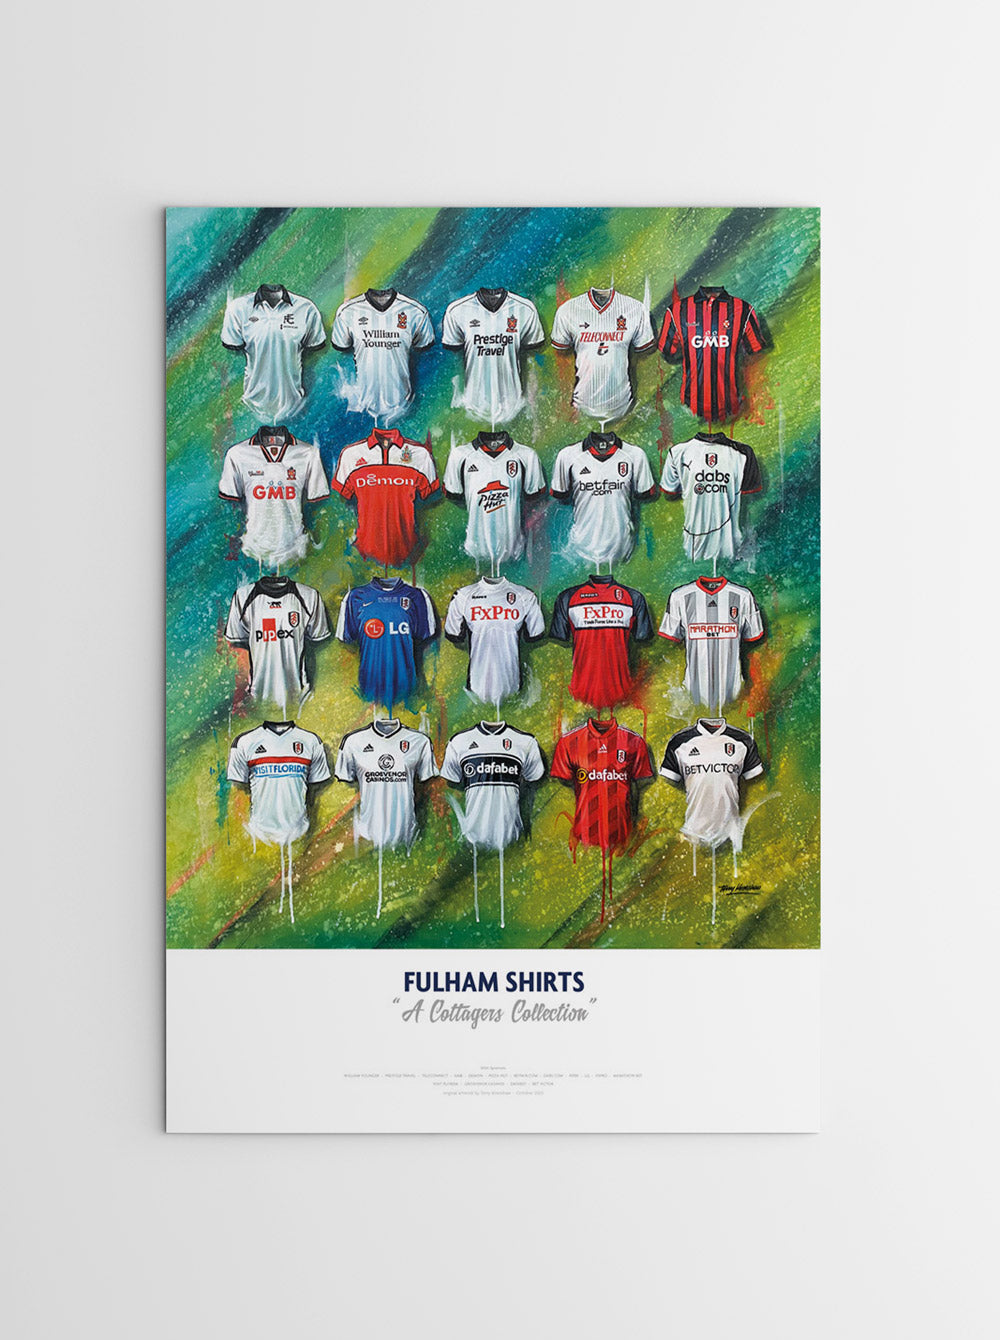 Artwork by Terry Kneeshaw depicting a collection of twenty iconic Fulham football jerseys worn by the club's players throughout their history. The jerseys are predominantly white with black accents and feature the Fulham crest and various sponsor logos on the front. The artwork is a high-quality print of a hand-painted original, which uses textured brushstrokes to create a dynamic effect. 